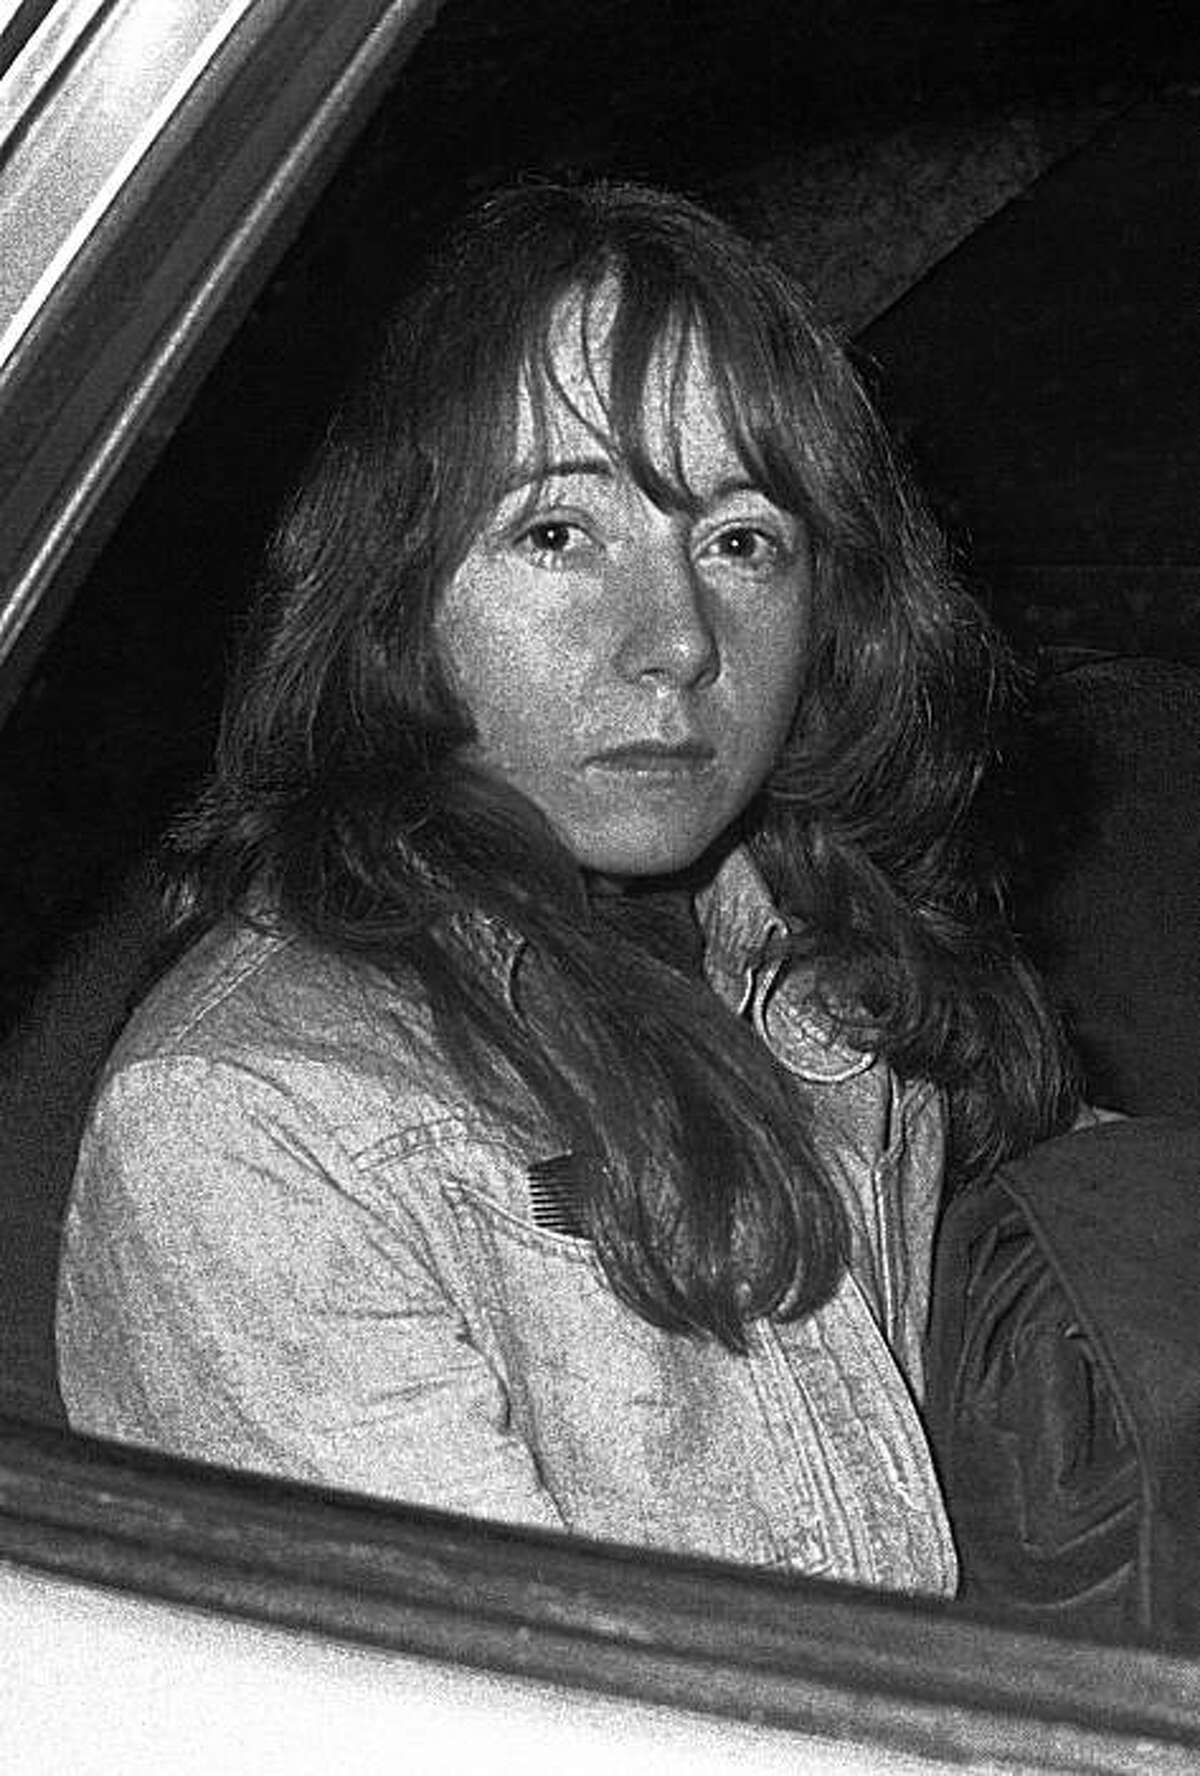 FILE - In this Nov. 25, 1975 file photo, Lynette Fromme sits in a U.S. Marshal's auto in Sacramento, Calif. as she returned to jail when jurors in her trial recessed for the evening. Fromme is accused of attempting to assassinate President Ford with a gun outside the California Capitol in Sacramento on Sept. 5. The Federal Bureau of Prisons and the court-appointed attorney who represented Fromme at trial say the now 60-year-old is to be released from the Federal Medical Center Carswell in Fort Worth, Texas, on Aug. 16, 2009. (AP Photo/Walt Zeboski, Pool)